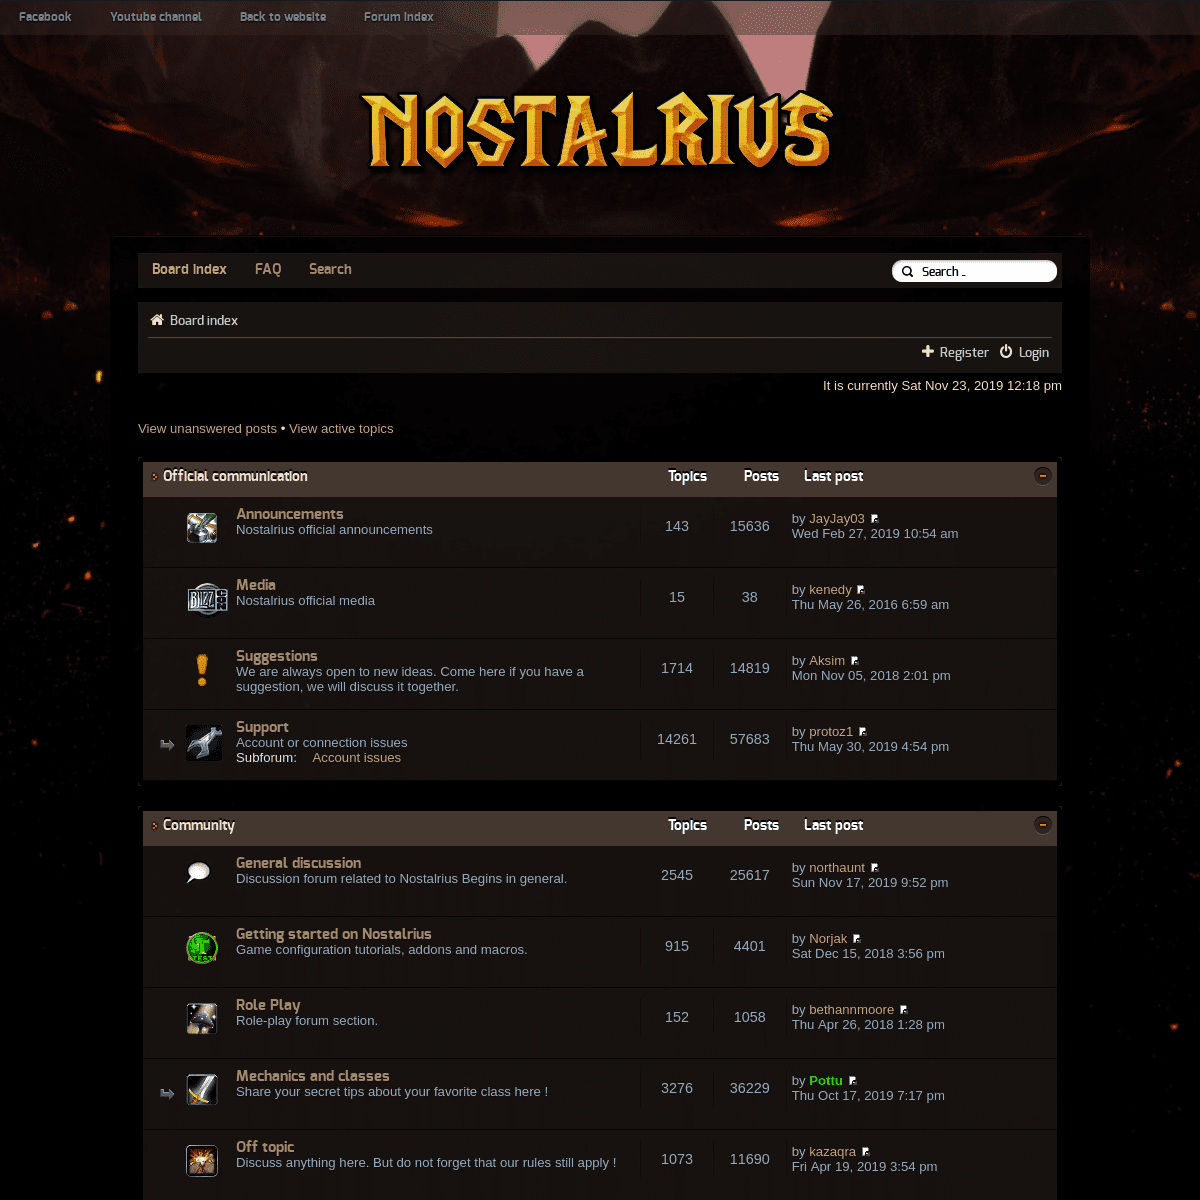 A complete backup of nostalrius.org